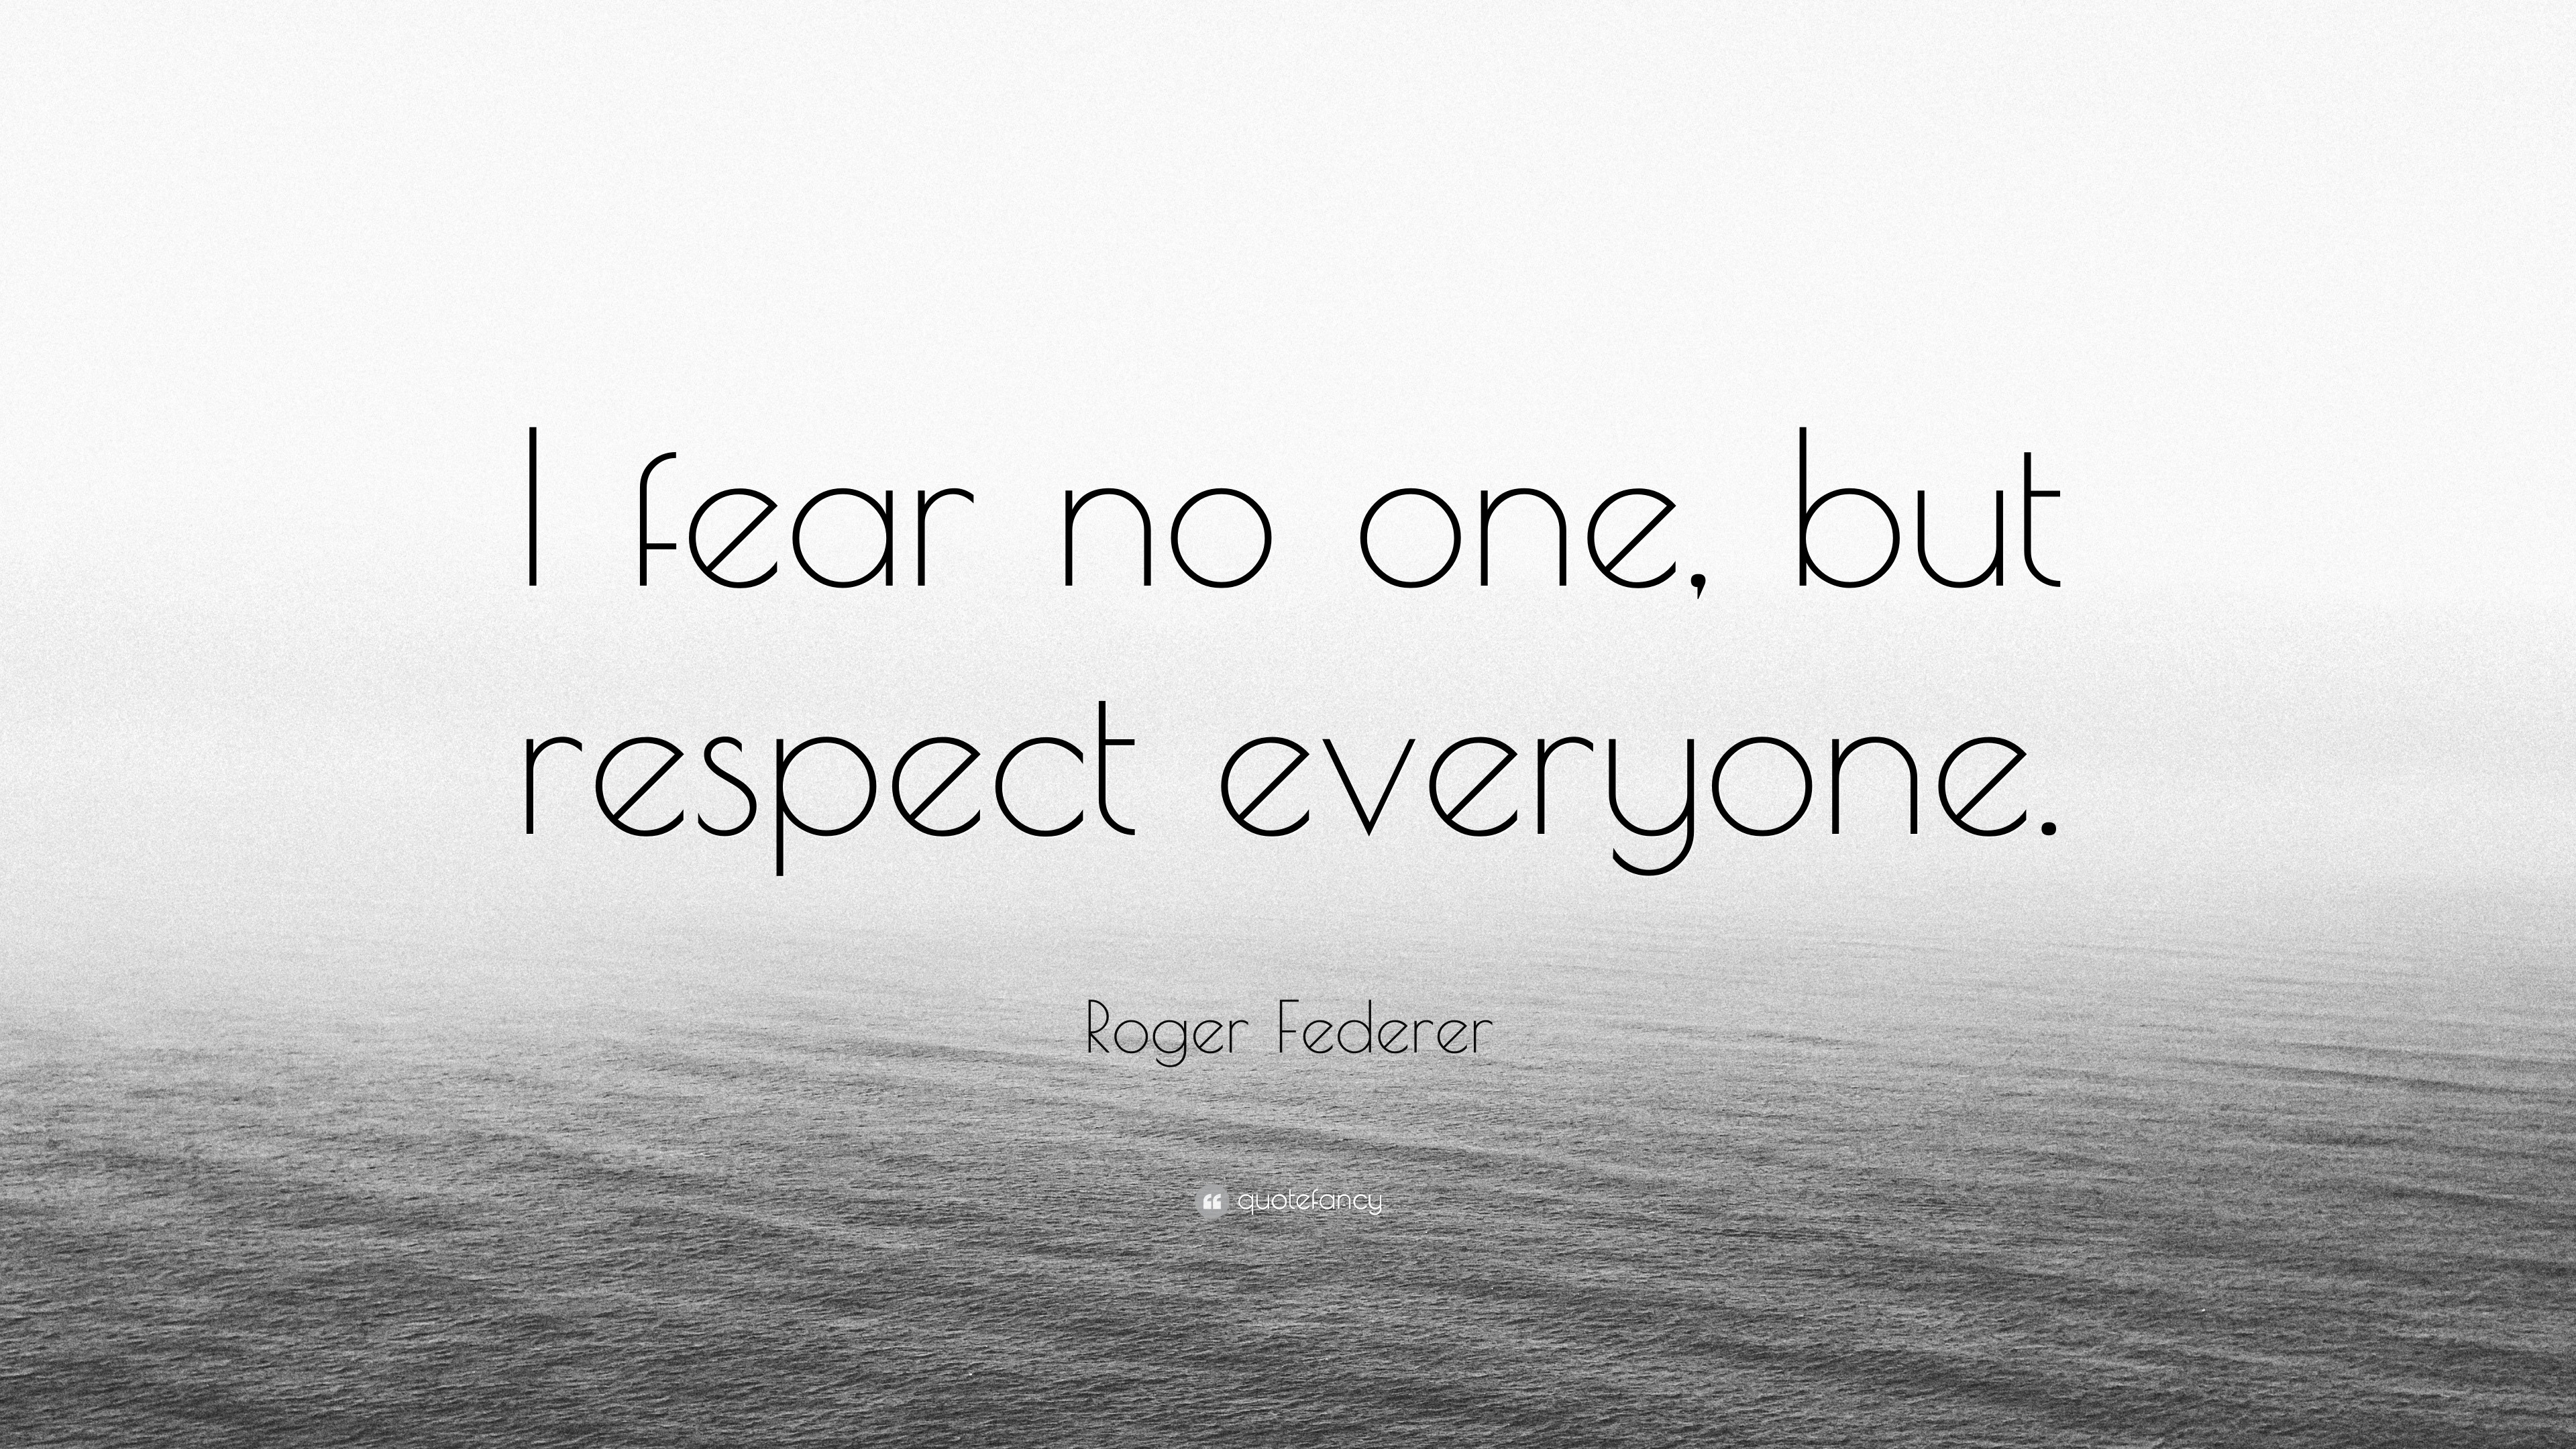 Roger Federer Quote: “I fear no one, but respect everyone.”